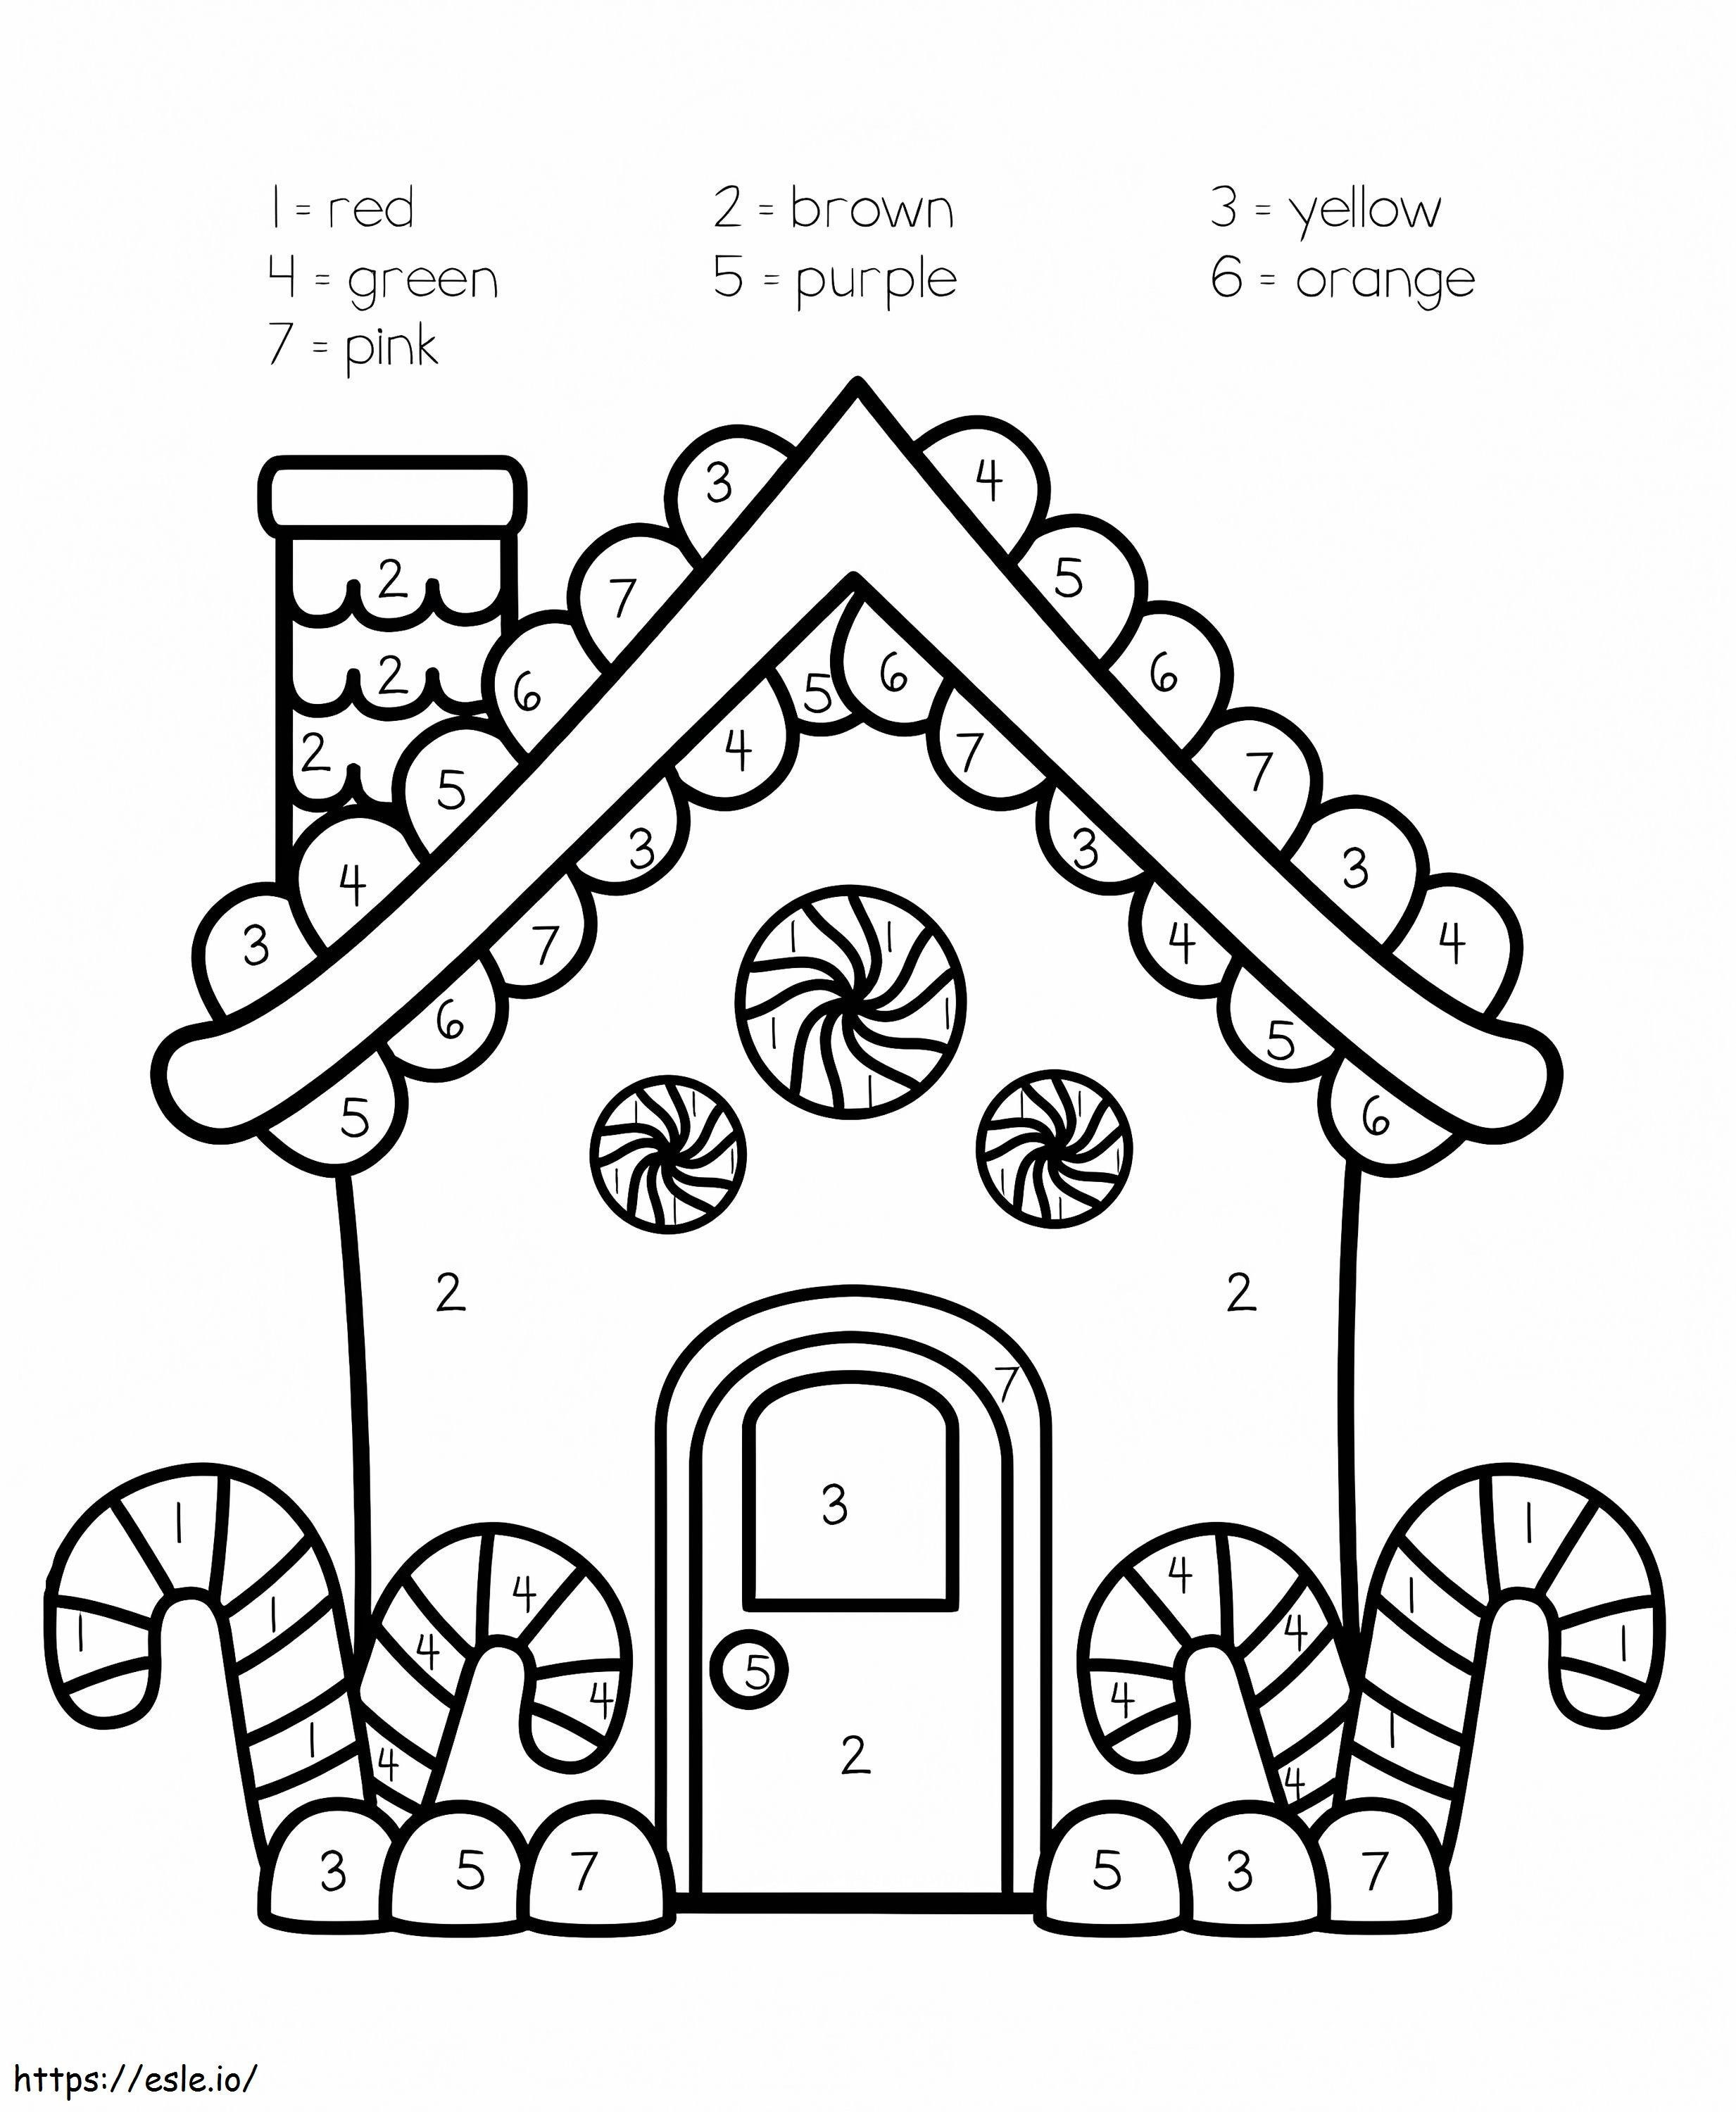 Gingerbread House Color By Number Worksheet coloring page